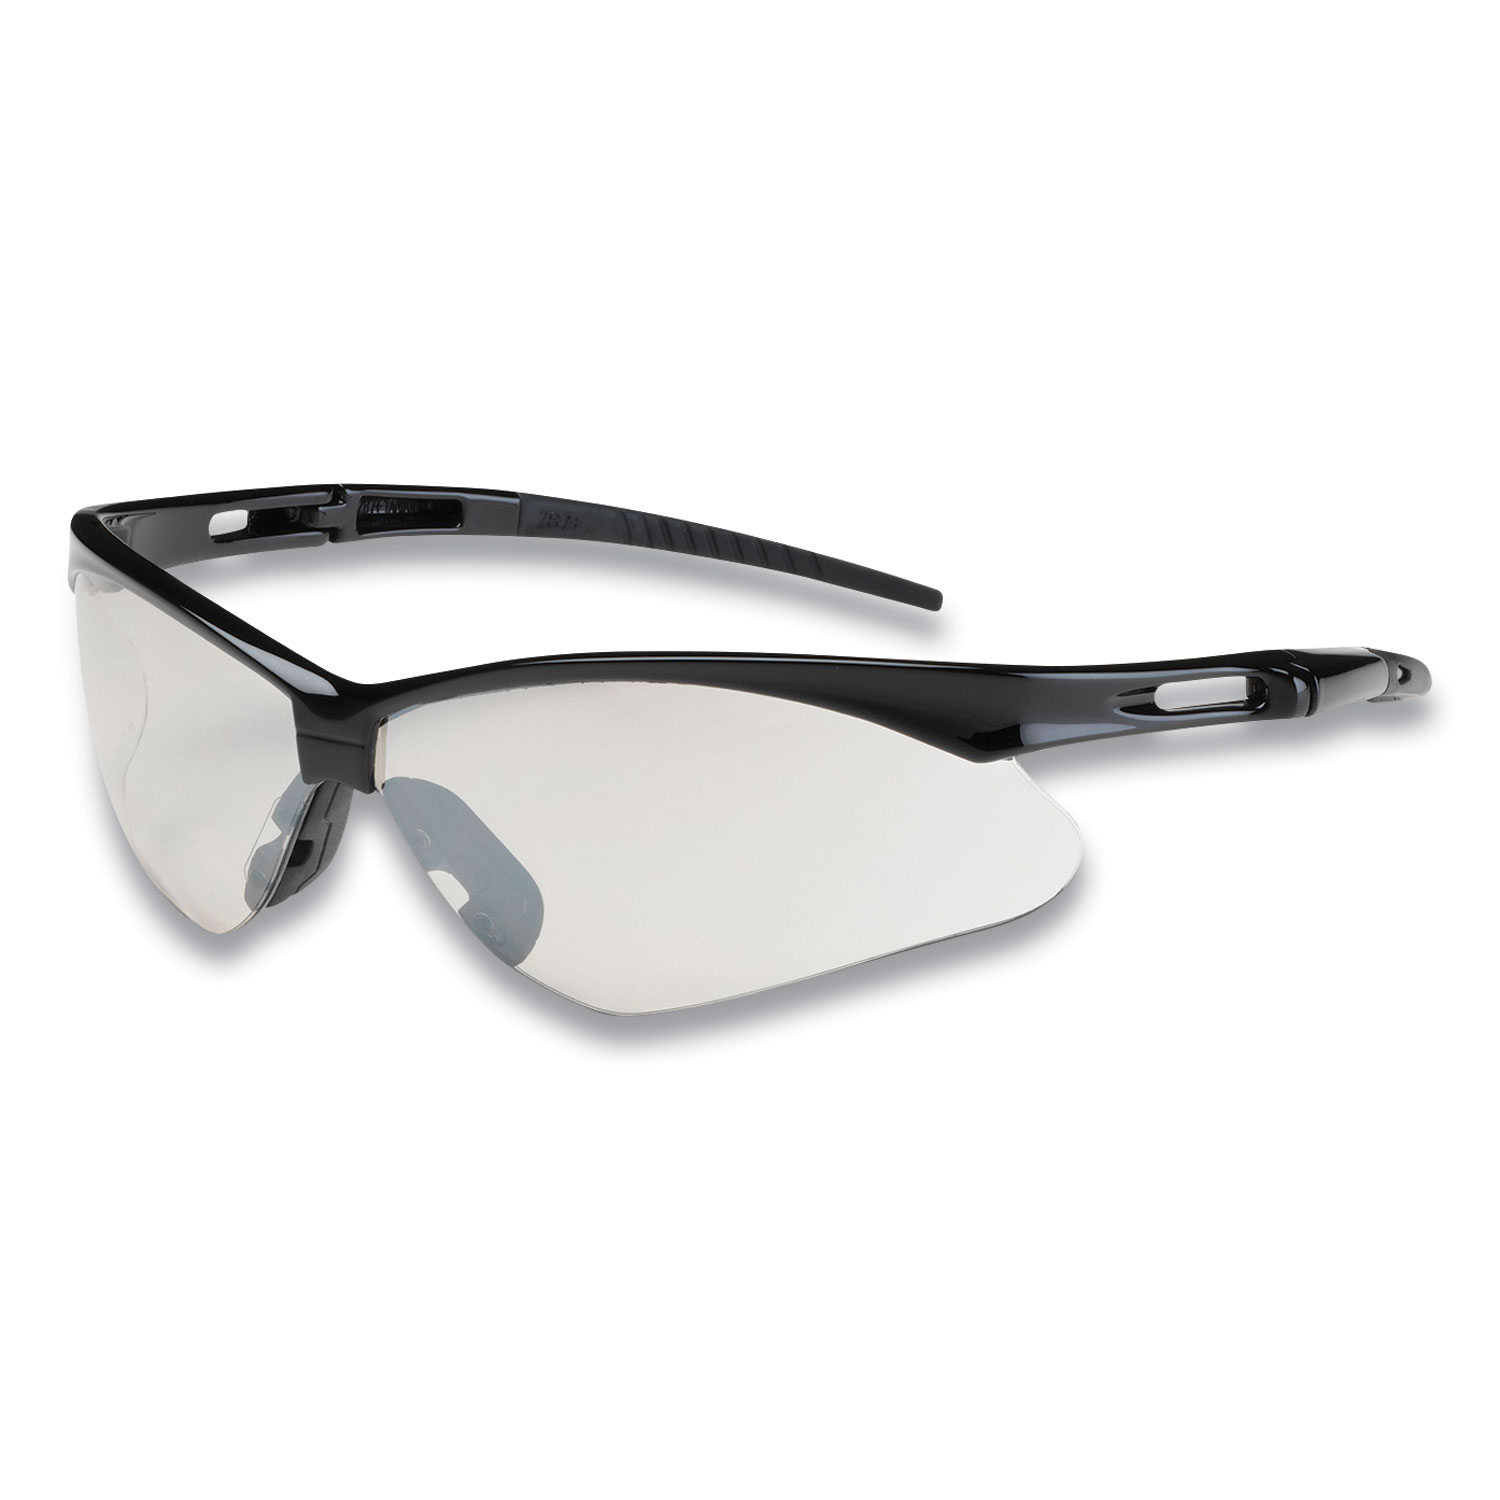 Bouton® Anser Optical Safety Glasses, Anti-Scratch, Clear Lens, Black Frame